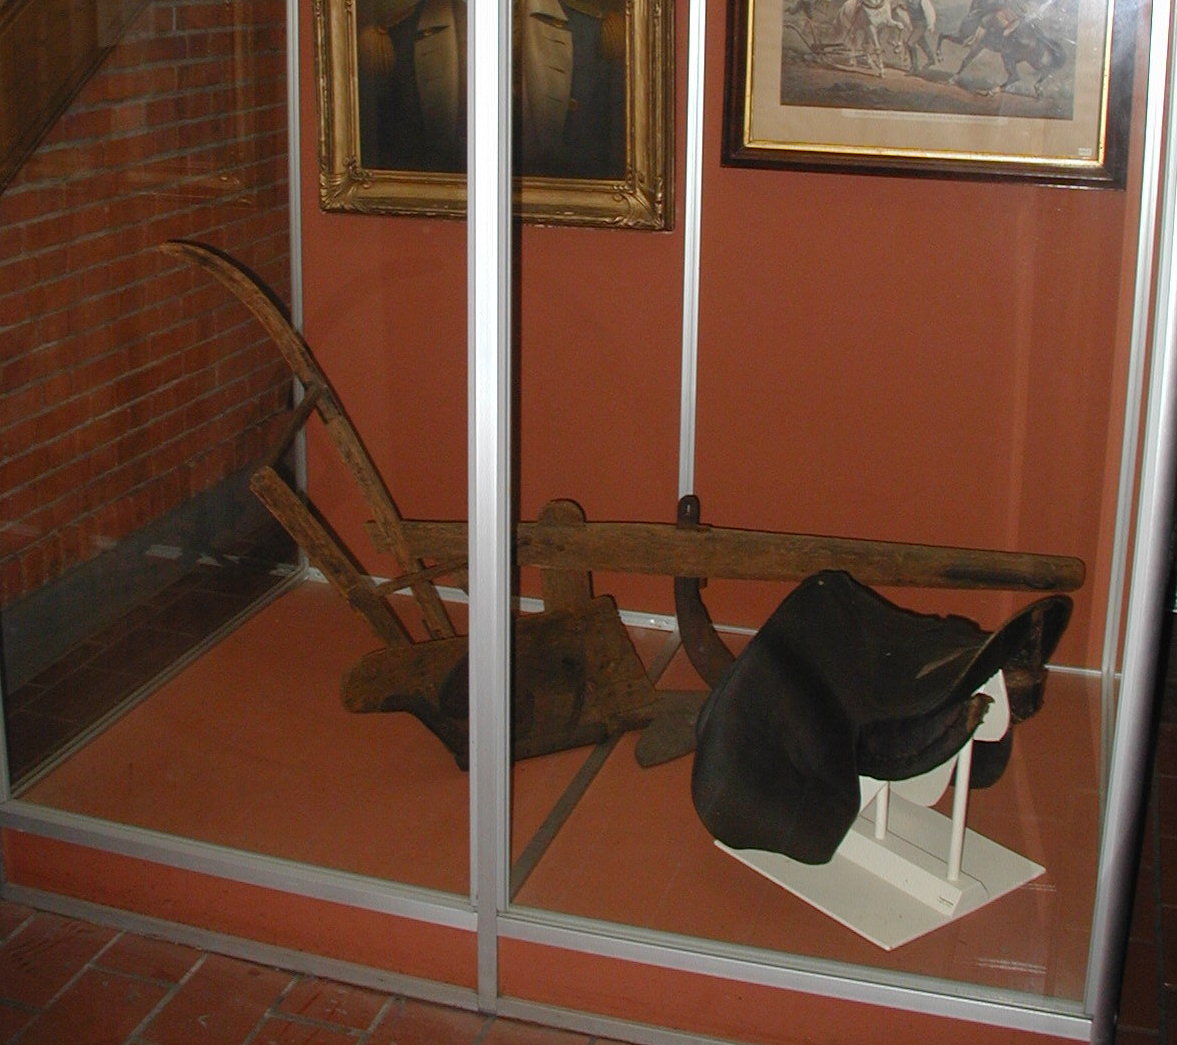 Putnam's Plow and Saddle.  On display in the Entrance Hall of the Hartford Armory.